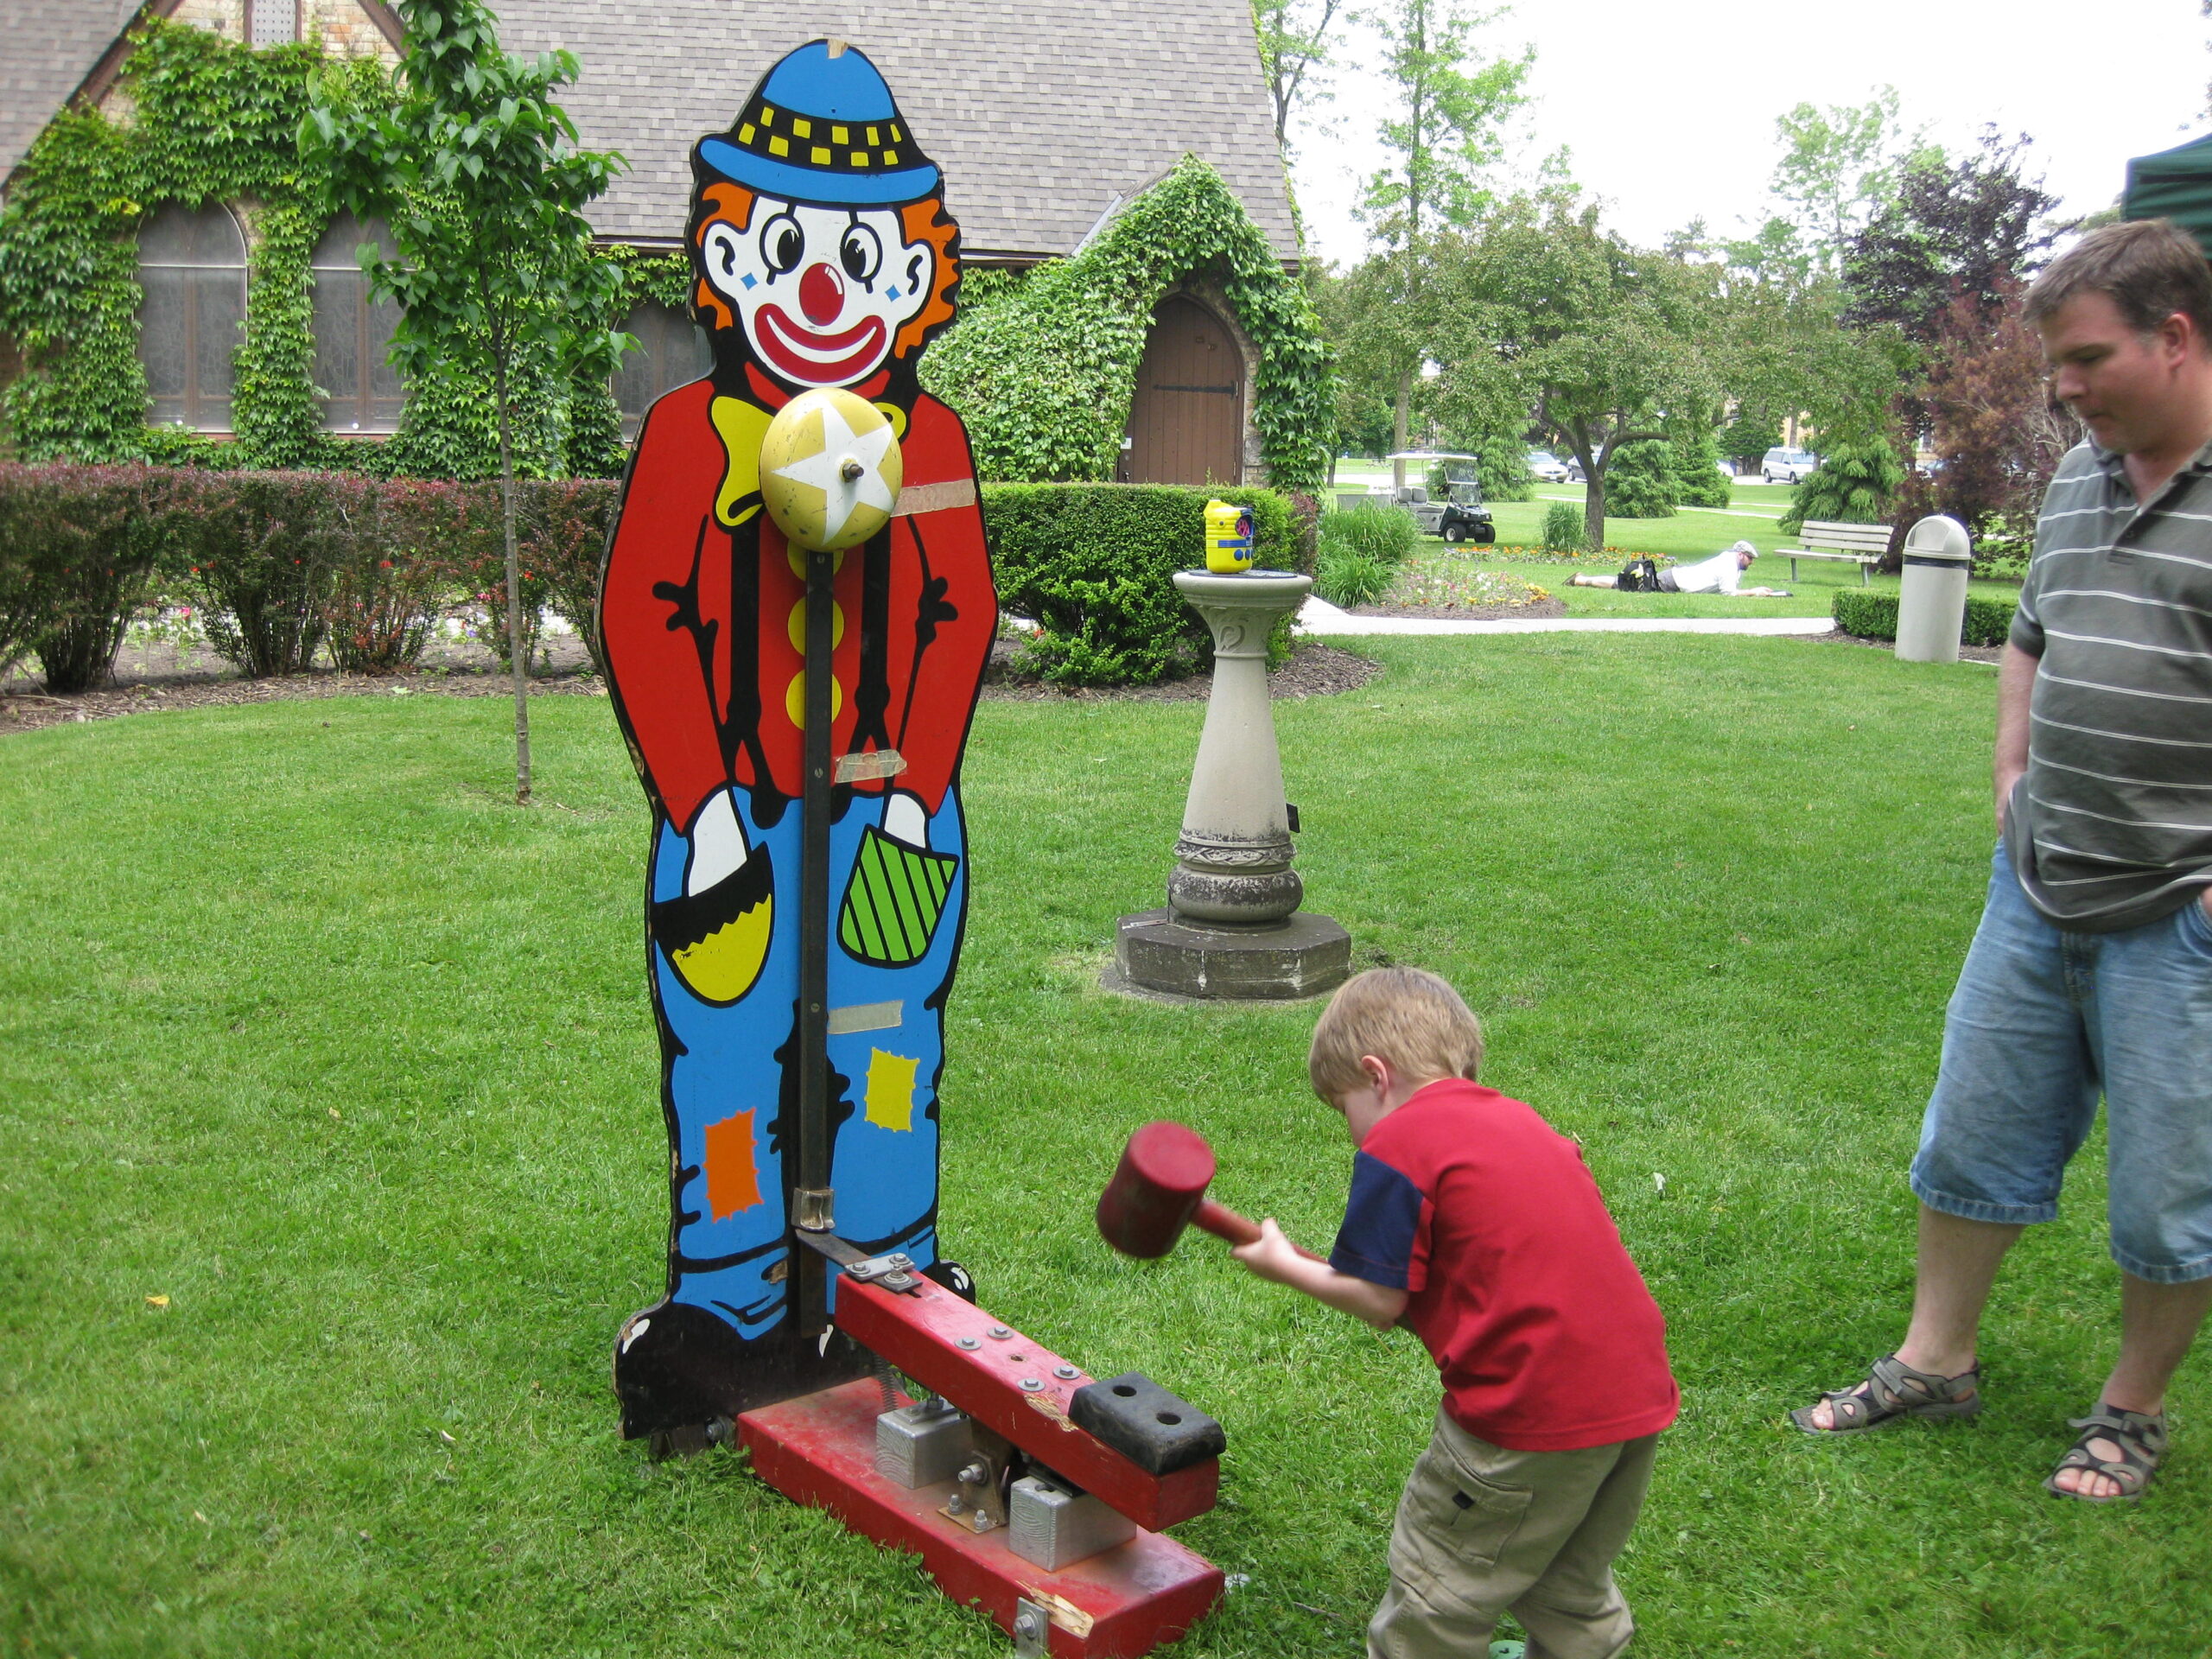 Child playing the clown easy striker